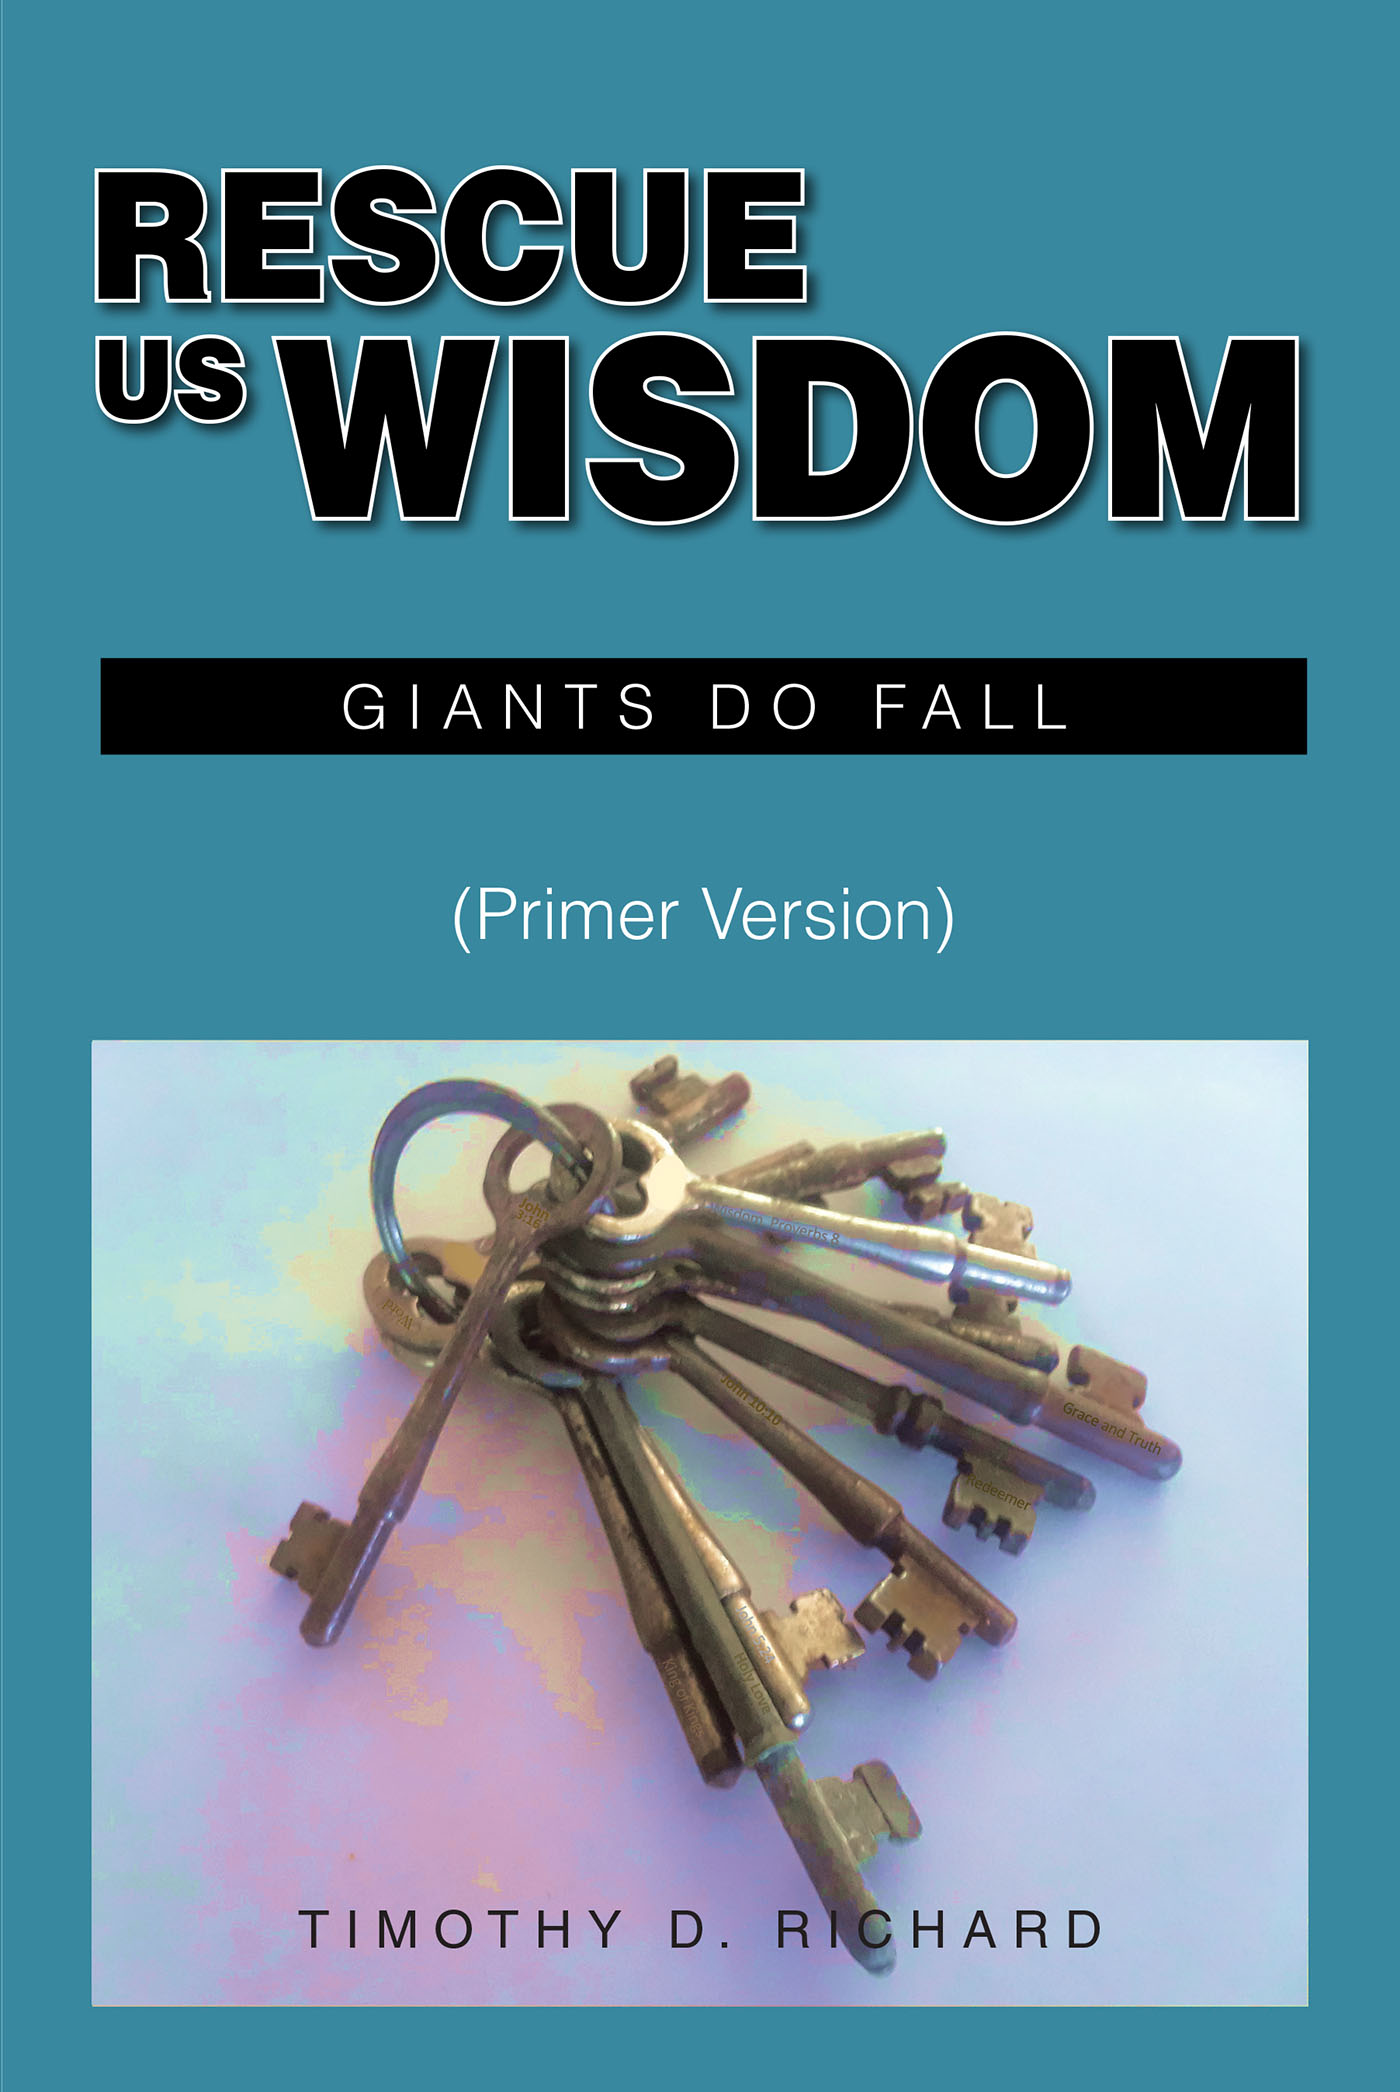 Timothy D. Richard’s Newly Released "Rescue Us Wisdom: Giants Do Fall: Primer Version" is a Faith-Filled Dissection of Culture Using John 10:10 and King Solomon’s Wisdom